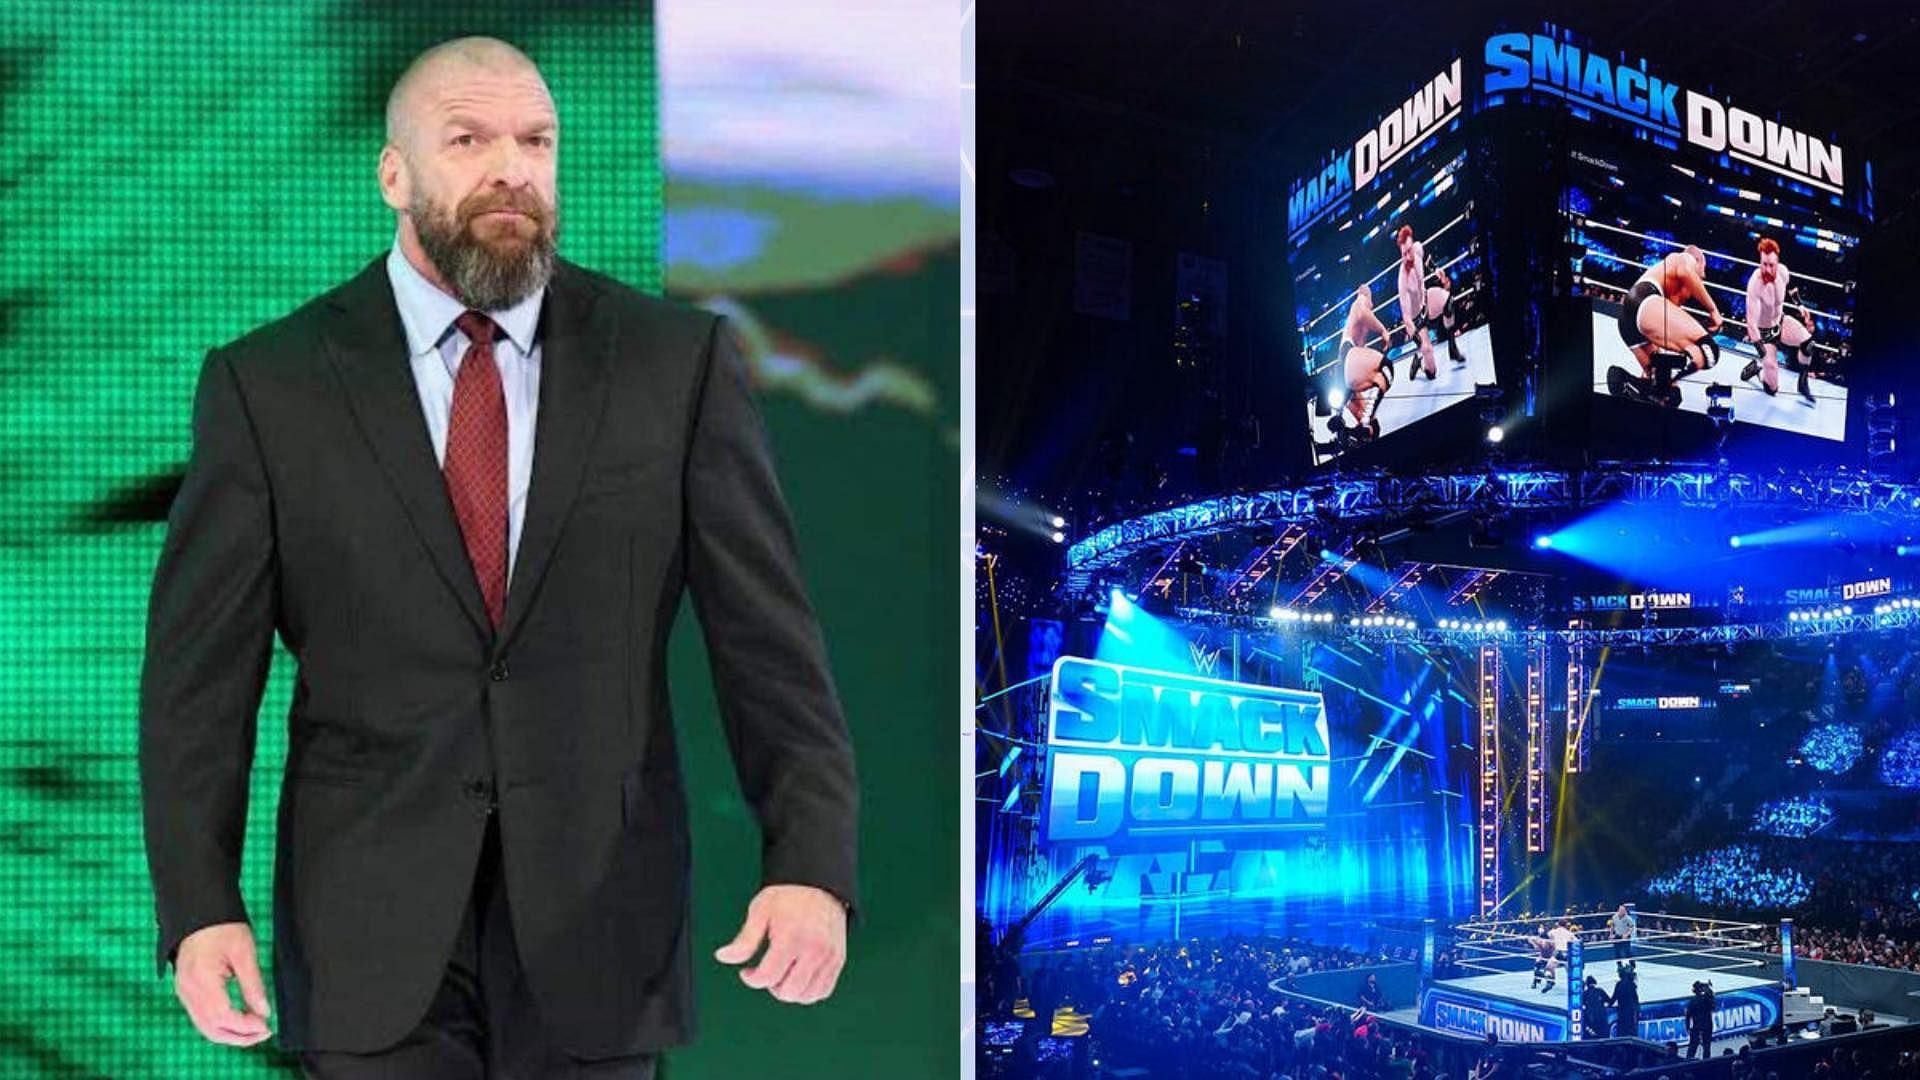 Triple H expresses his excitement before the upcoming SmackDown event (Source: WWE)